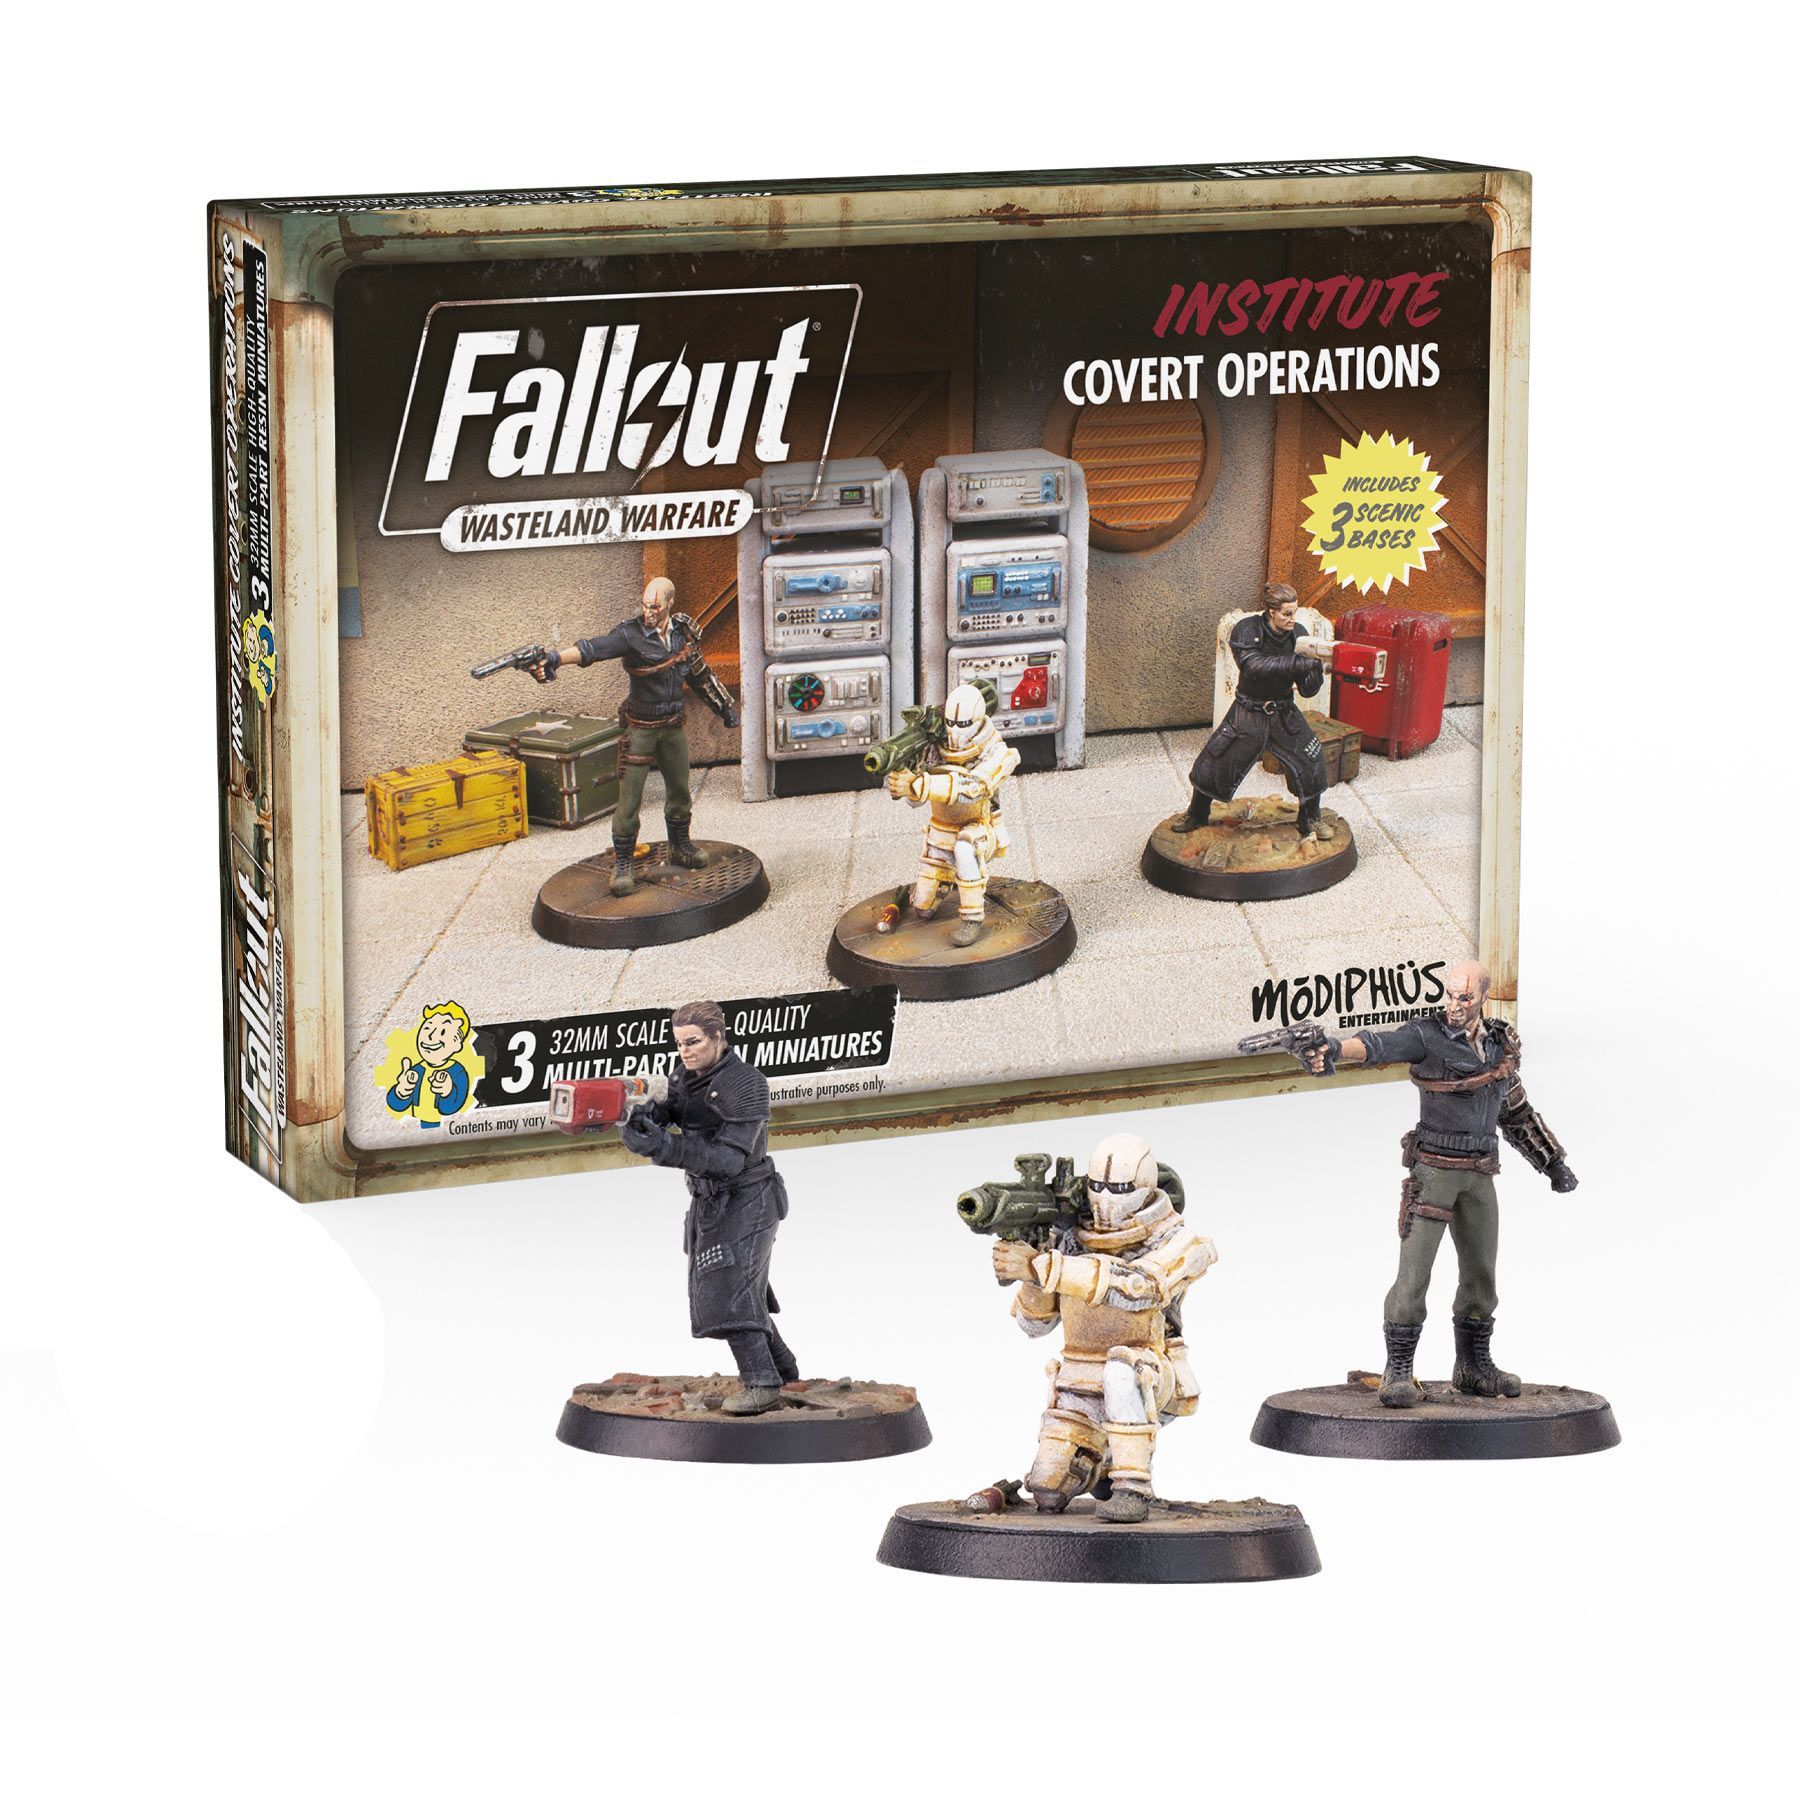 Fallout: Wasteland Warfare - Institute: Covert Ops